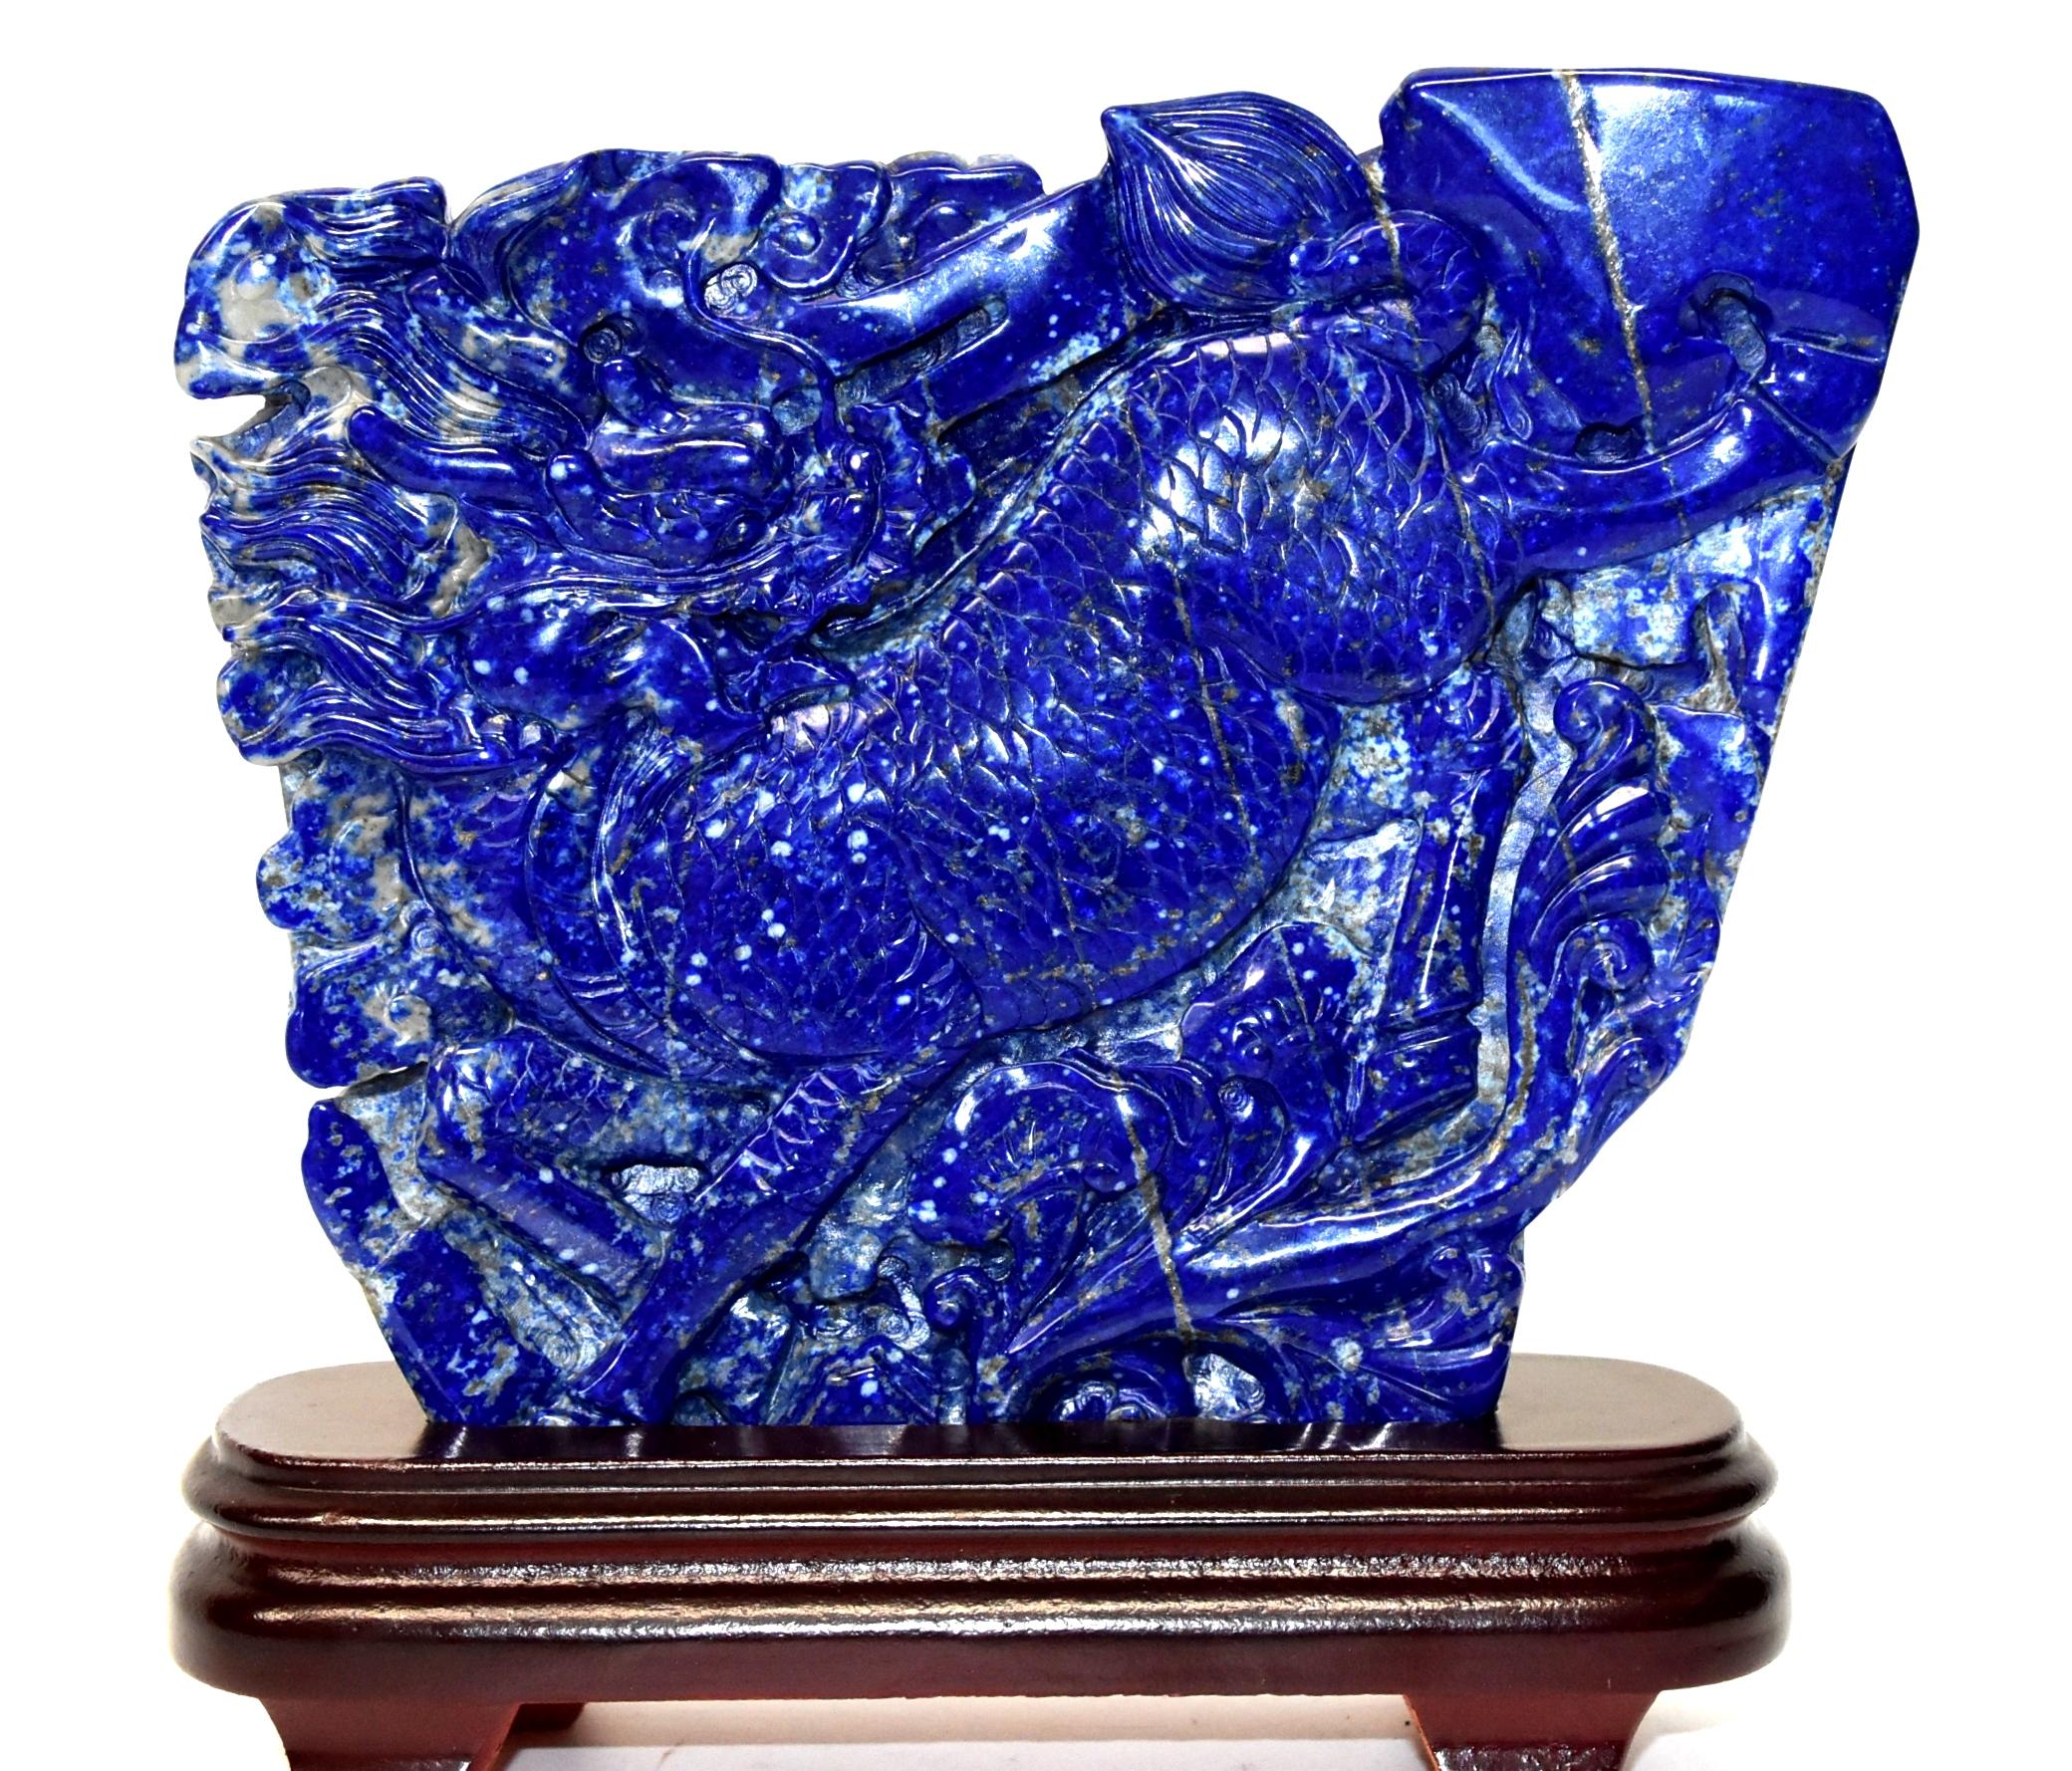 A beautiful all natural 1st grade lapis lazuli Qi Lin sculpture. The gorgeous blue stone has stunning glittering of gold and white snow scatters, a contrast that creates wonderful visual effect. Fantastic carving work shows off the Qi Lin's scales